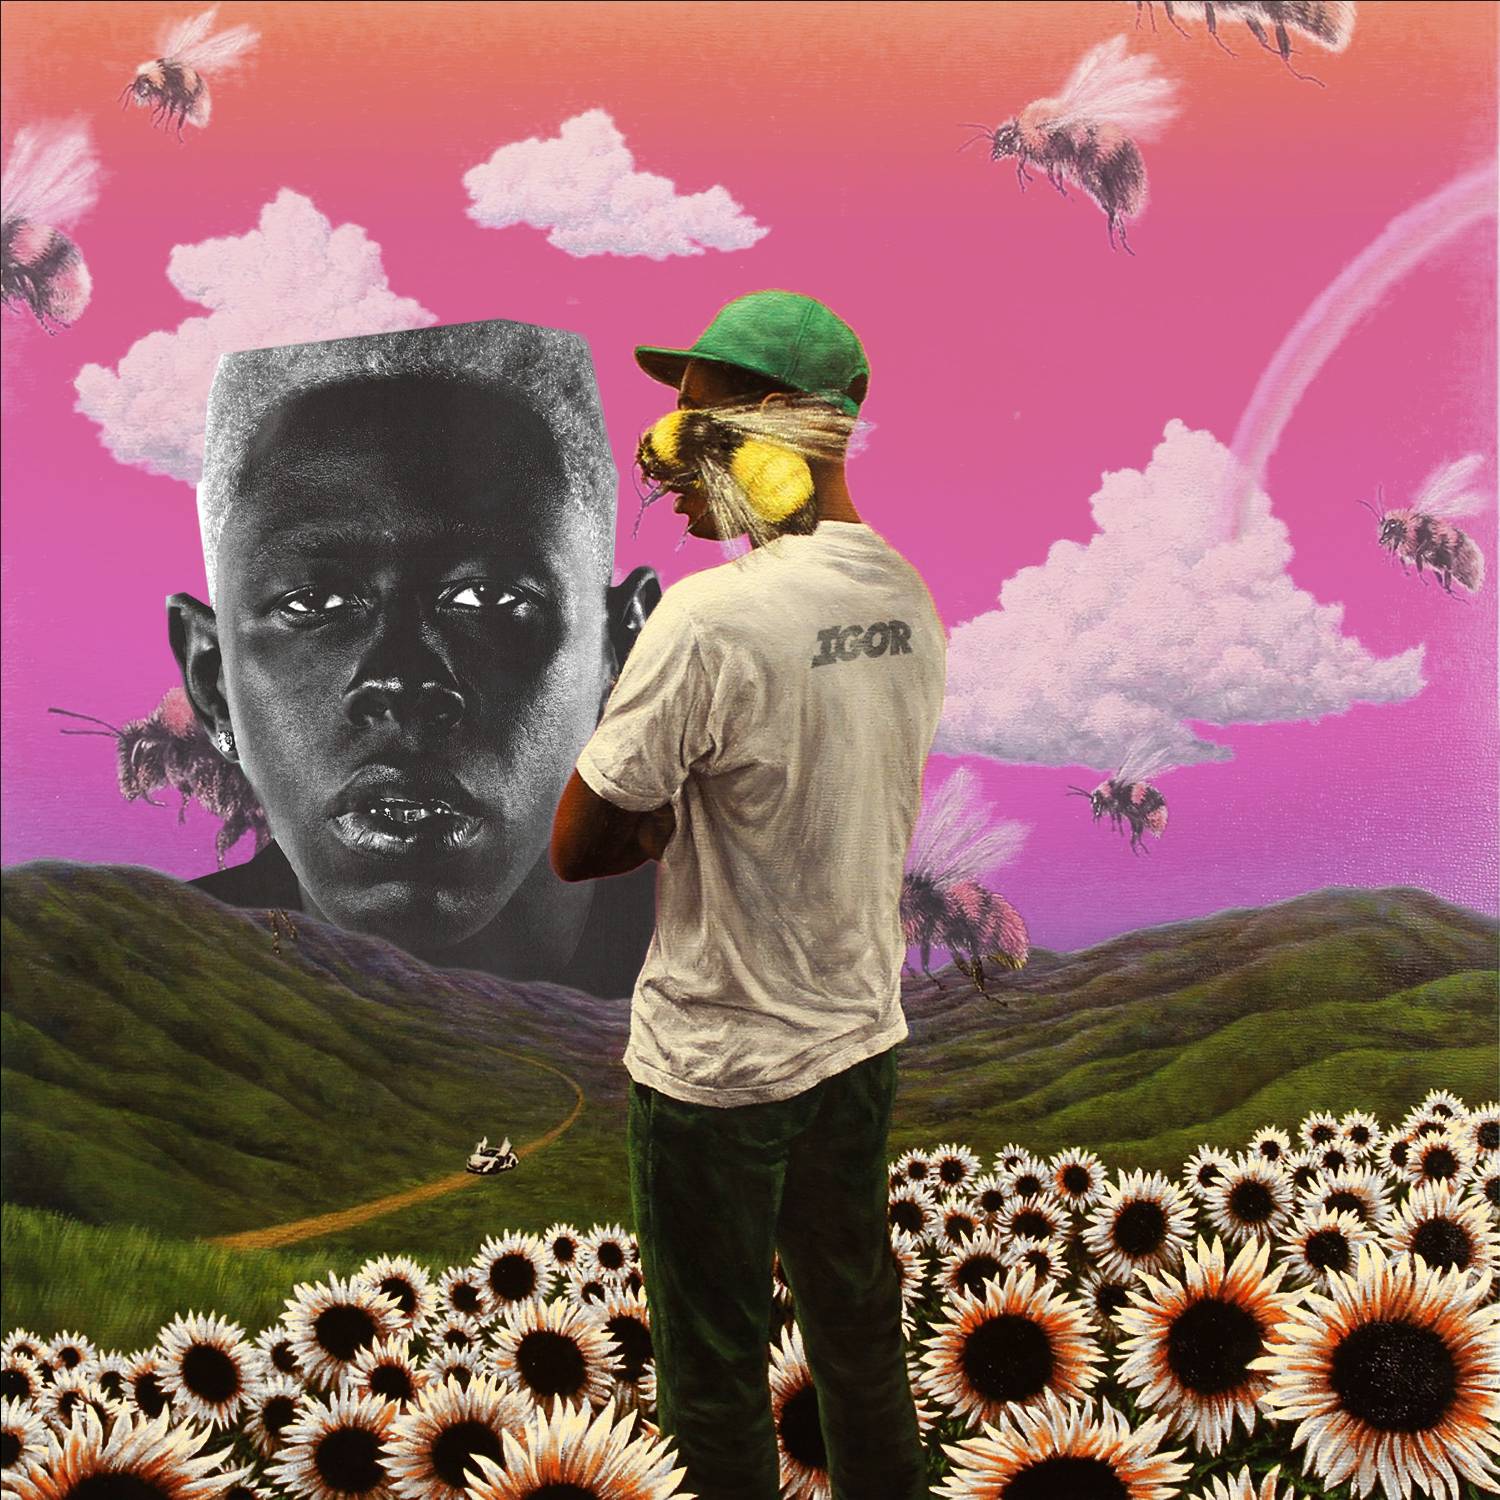 I combined the album covers of my 2 favorite Tyler, The Creator albums: Flower Boy and IGOR